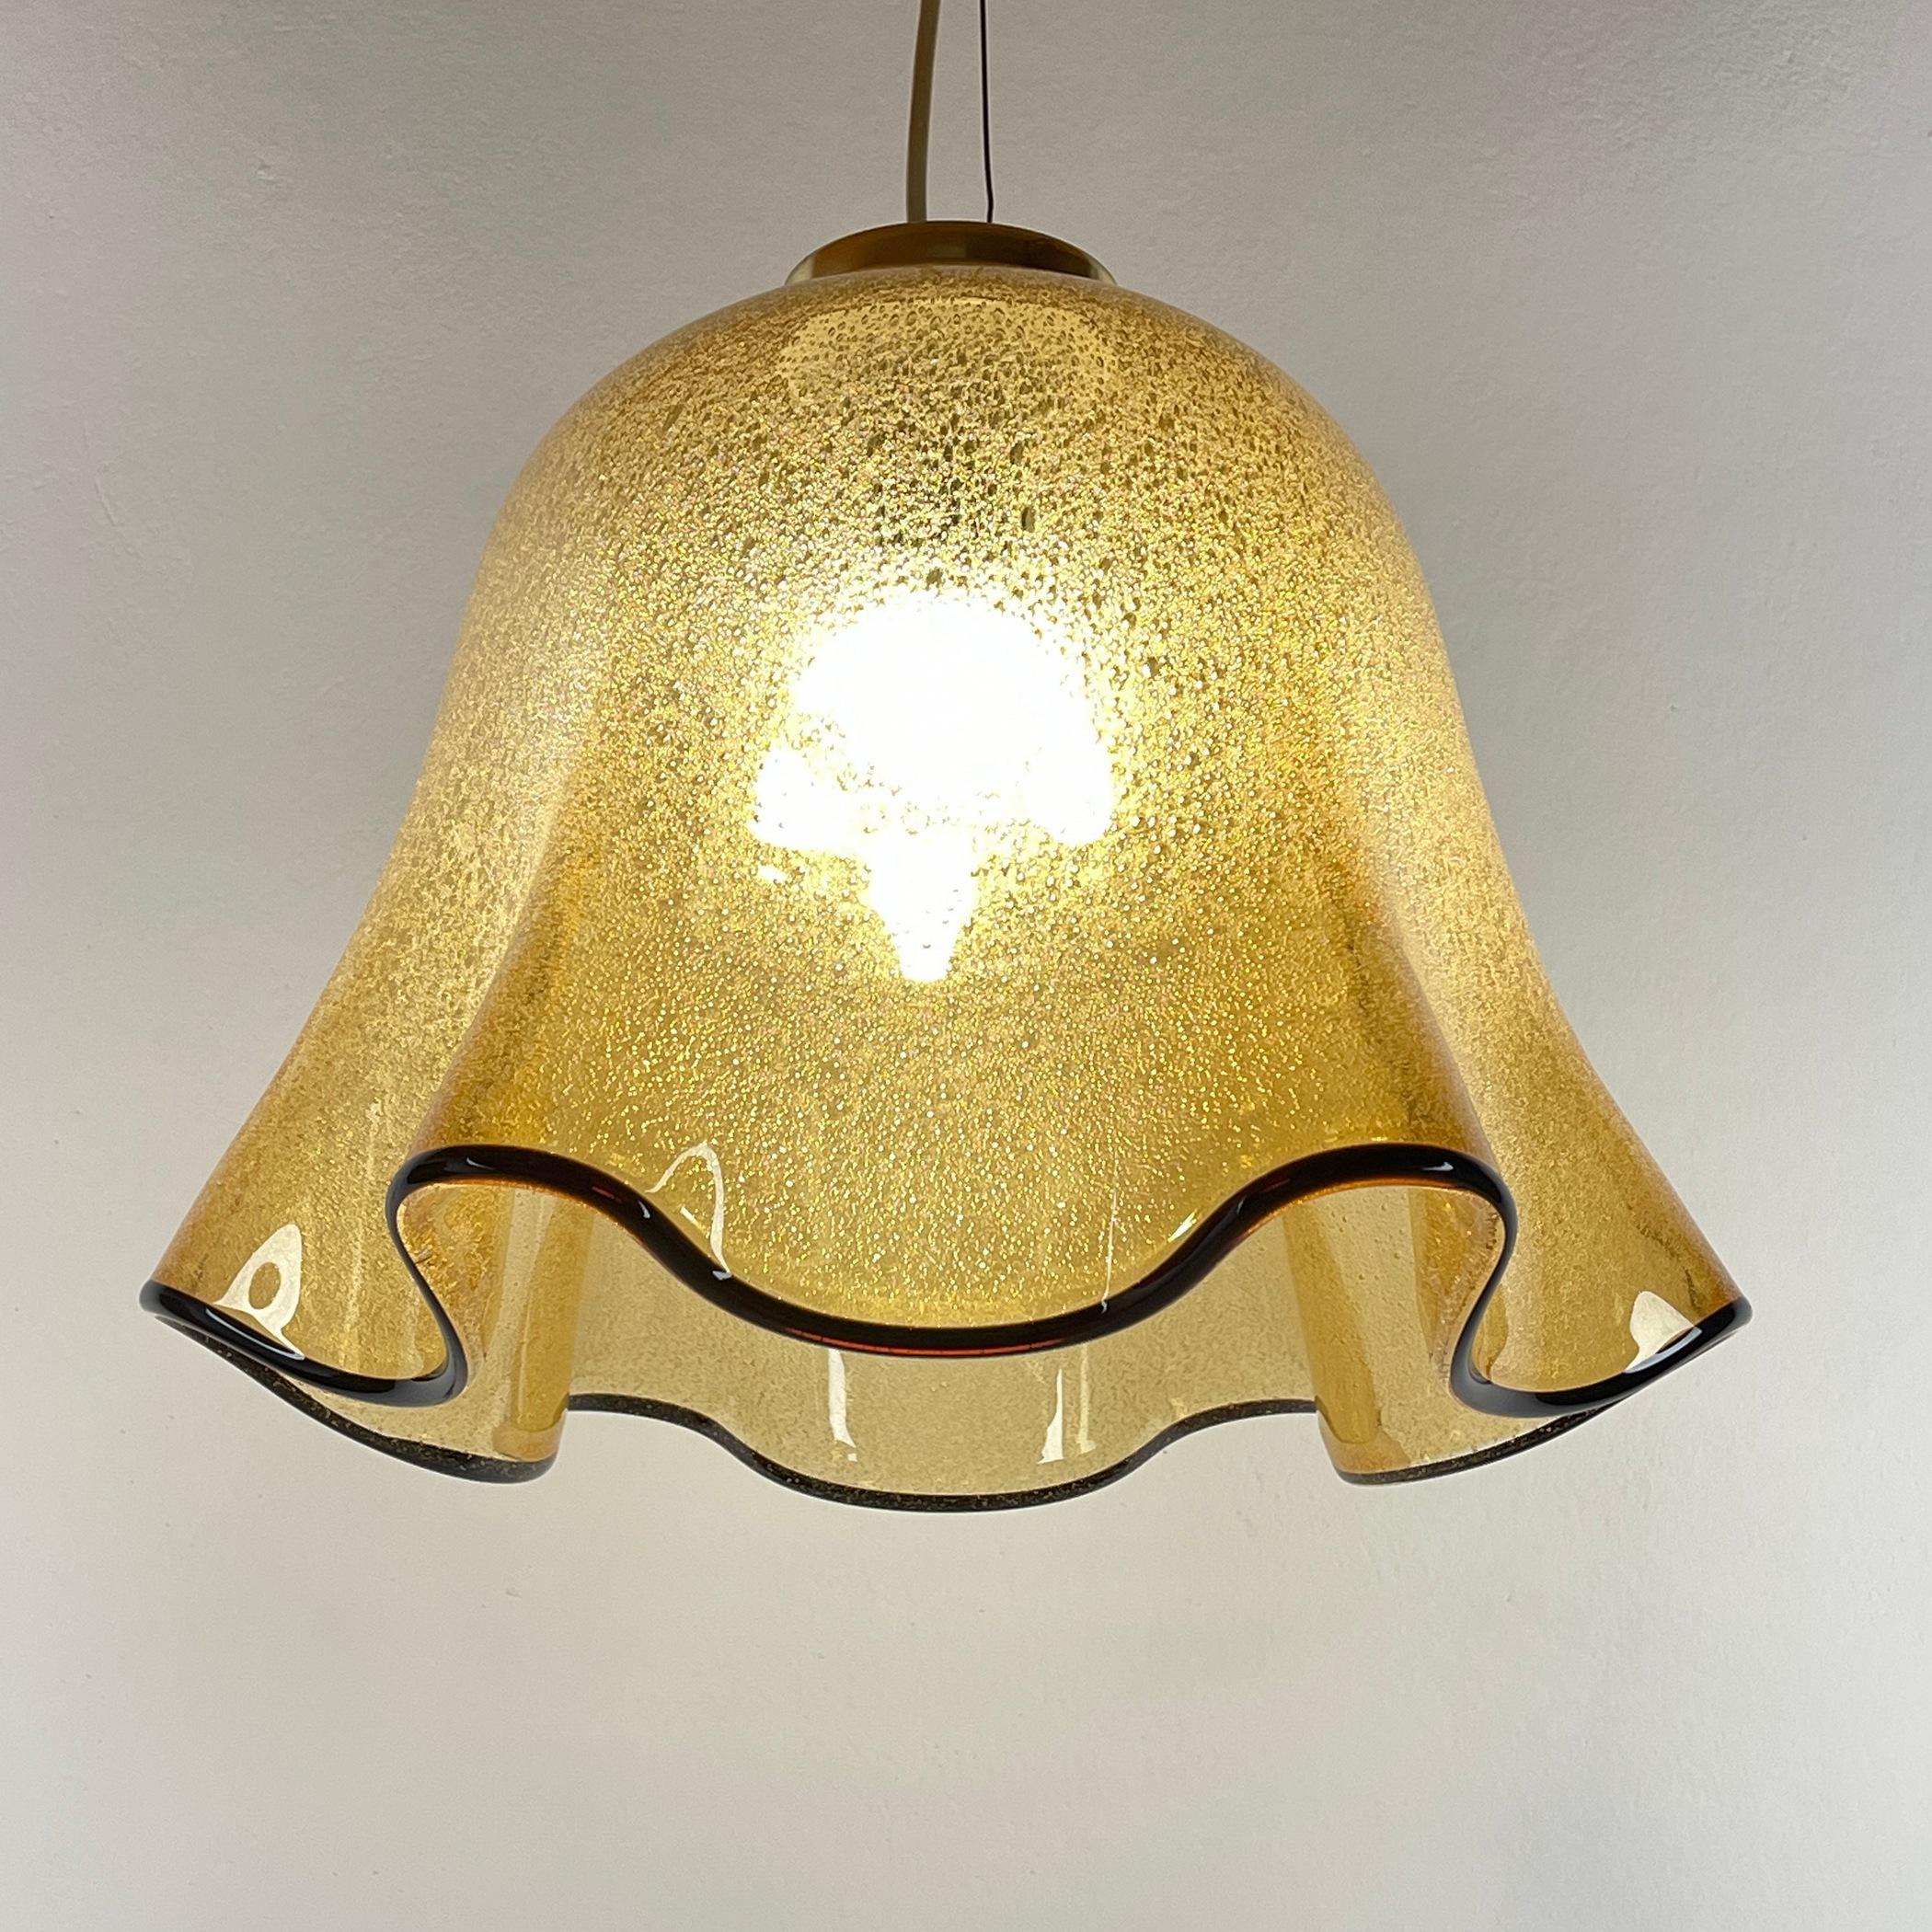 The beautiful Murano glass chandelier Fazzoletto Vetri Murano made in Italy in the 1970s. A yellow glass shade with a 